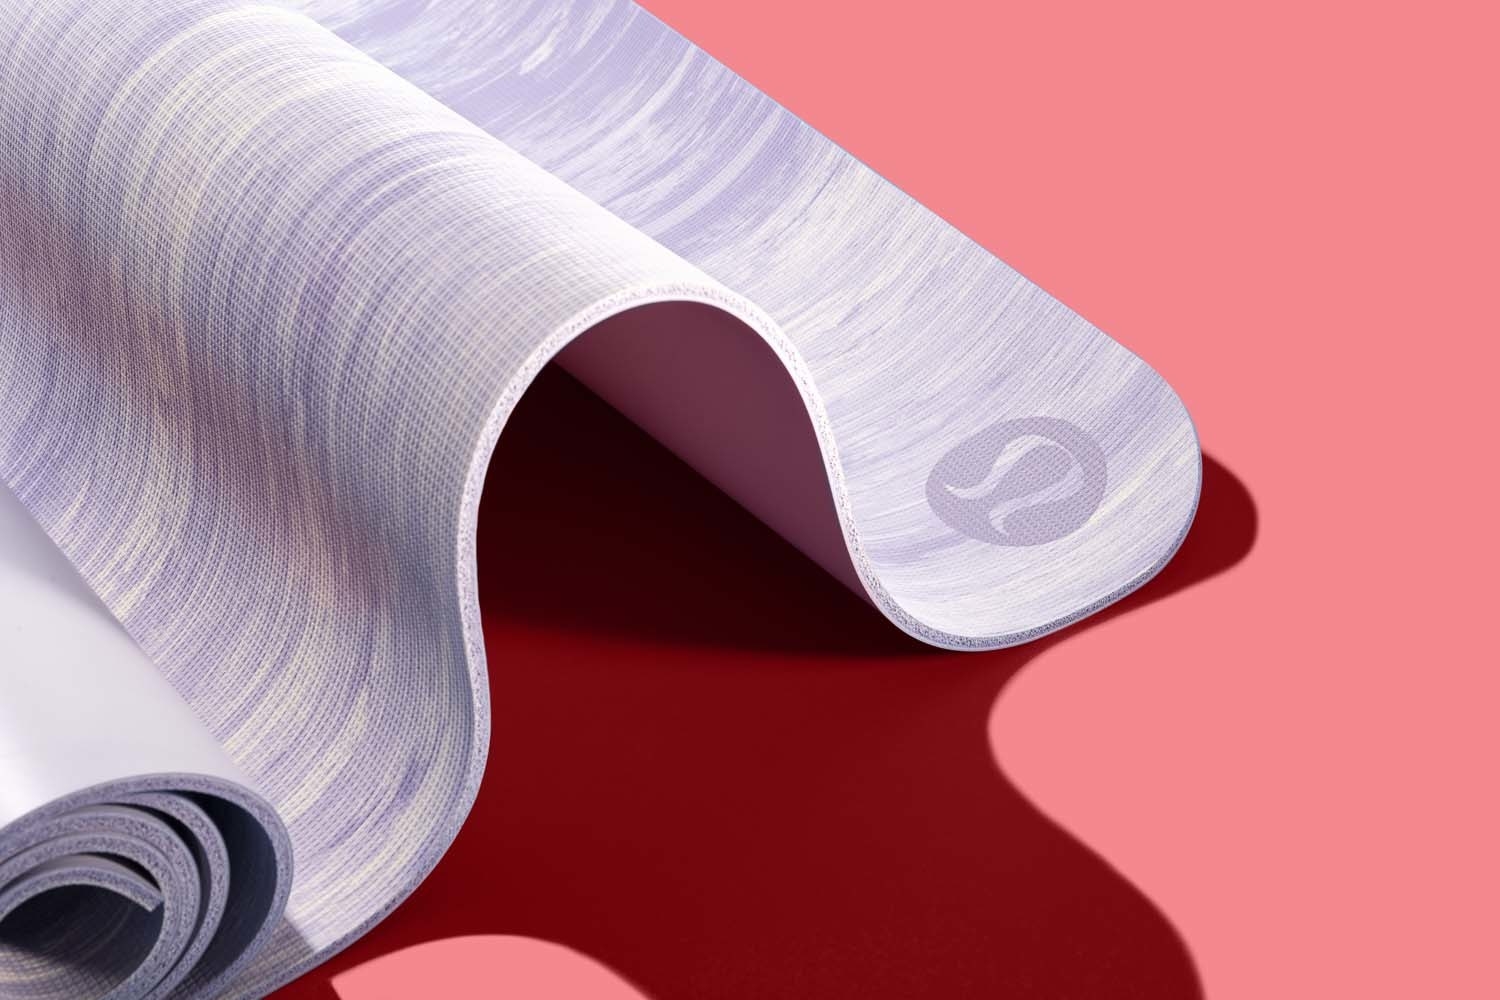 lululemon yoga mat which side up